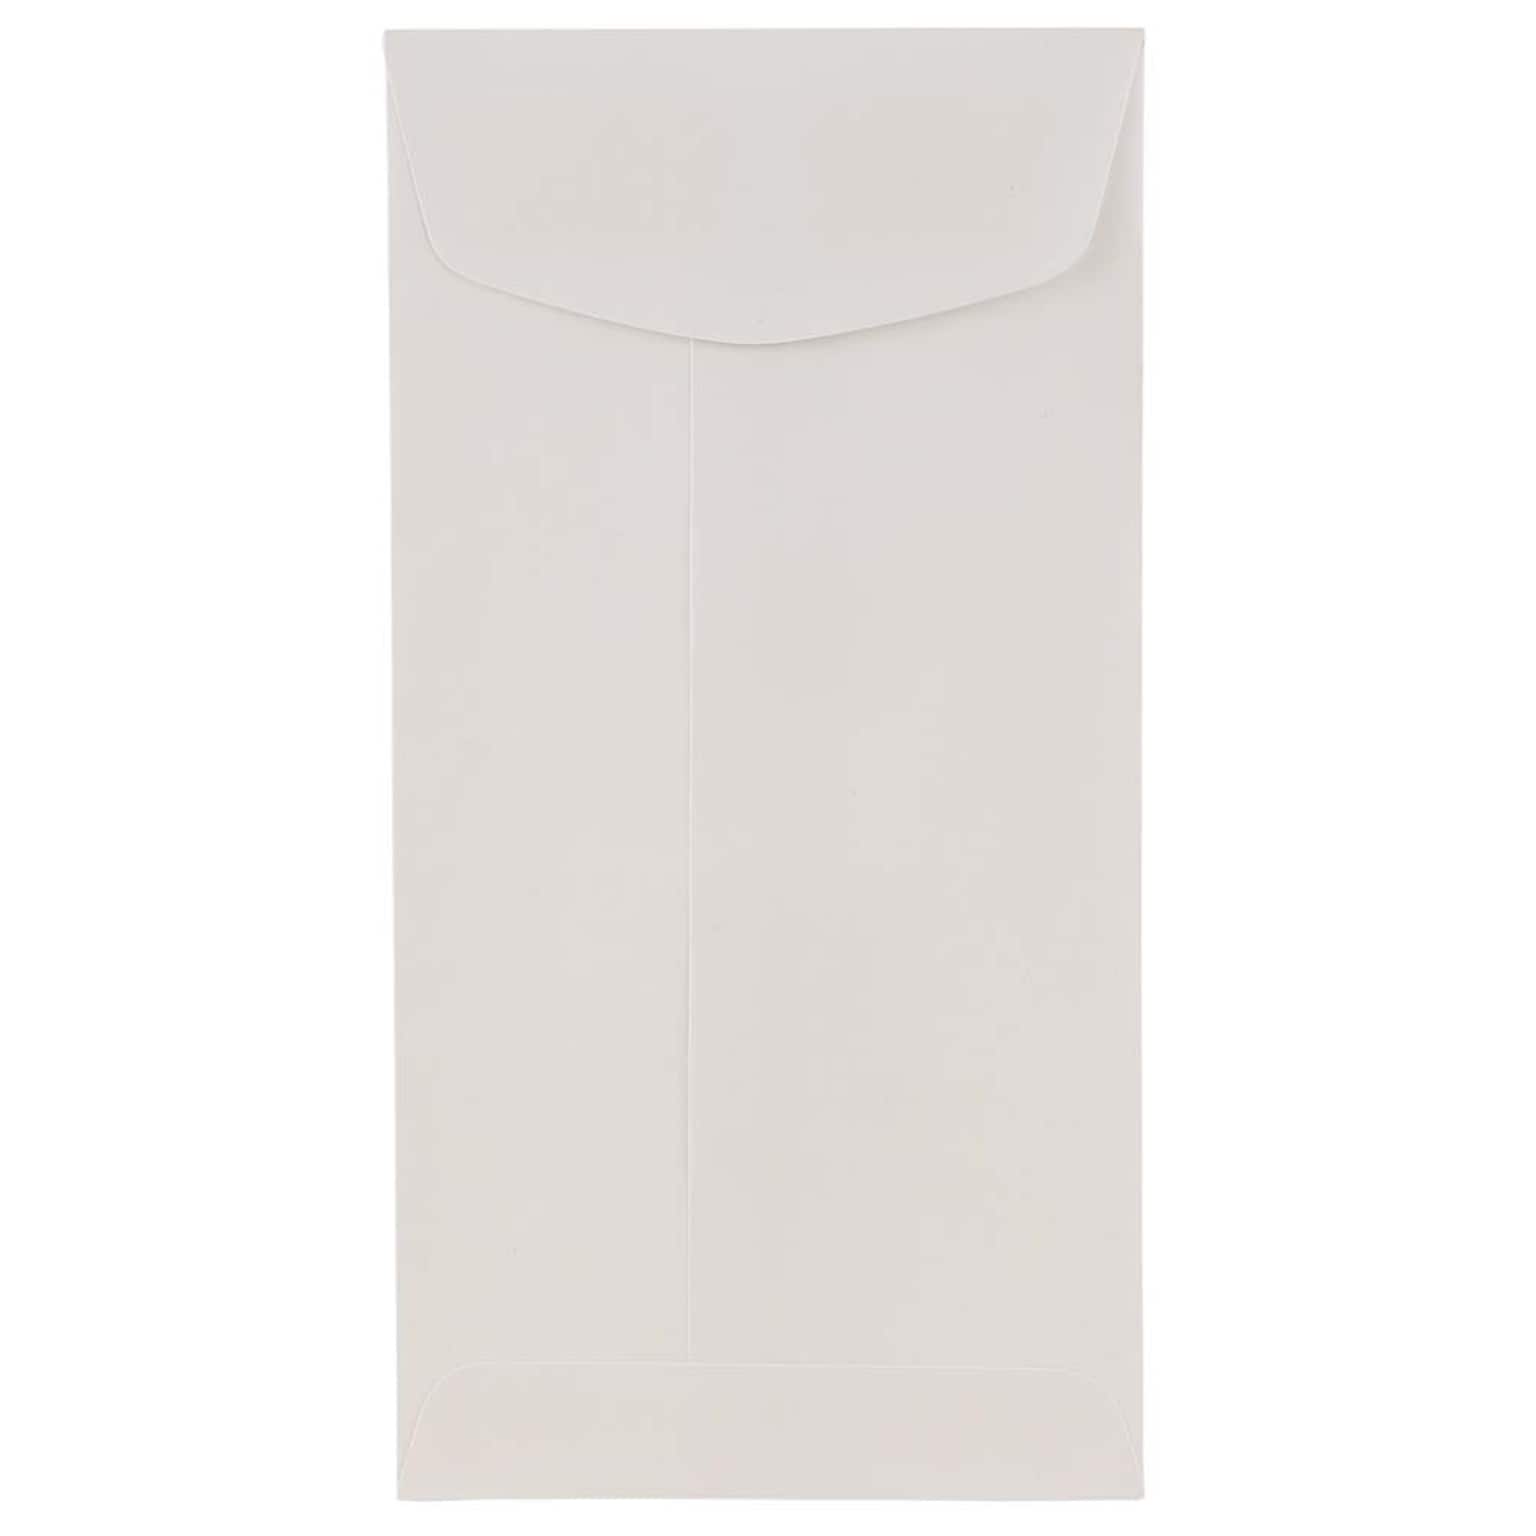 JAM Paper® Monarch Policy 8 Glove Envelopes, 3.875 x 7.5, White, 25/Pack (1623987)